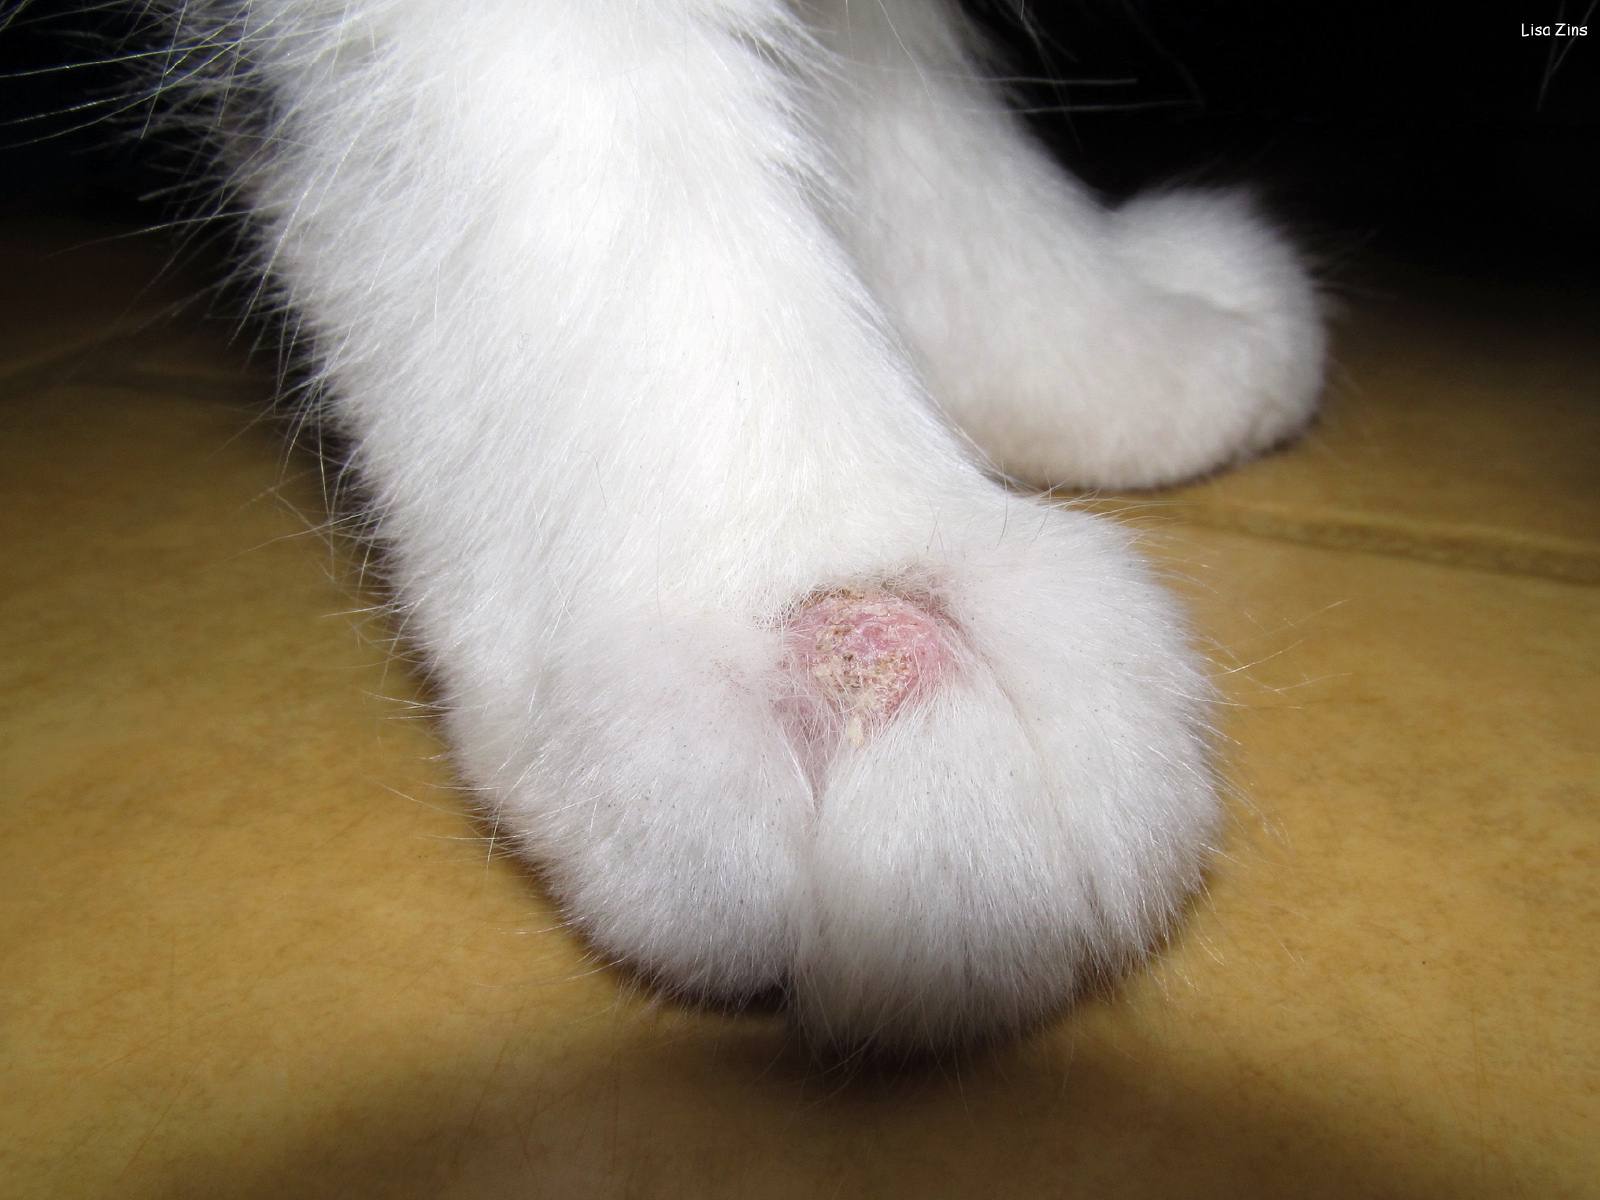 ringworm lesion on cat's front paw